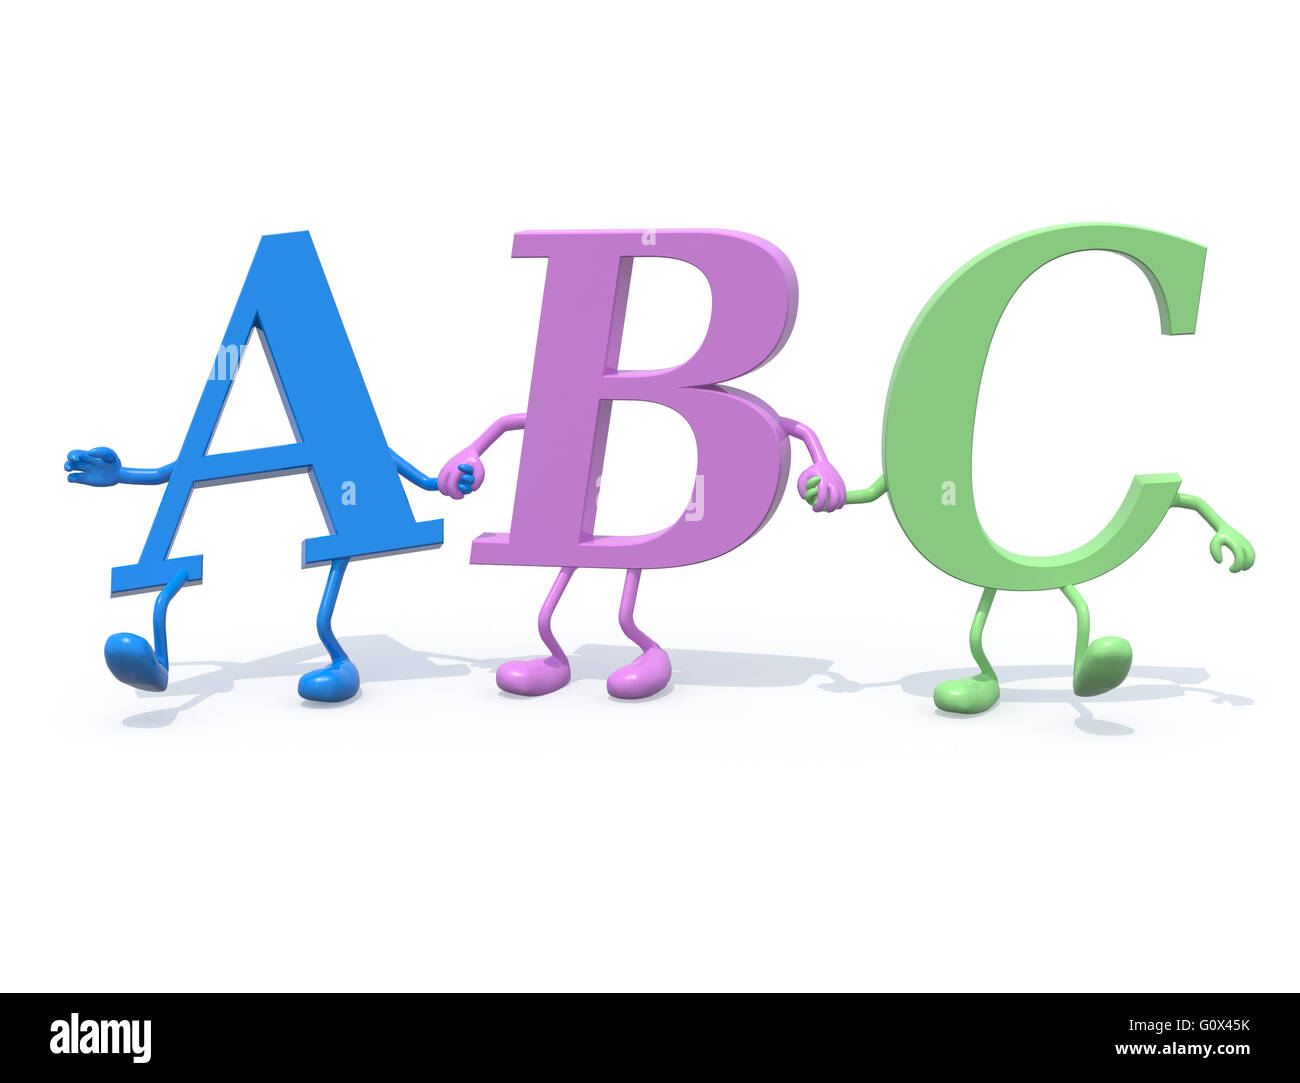 3d letters 'ABC' with arms and legs that walk hand in hand, 3d illustration Stock Photo